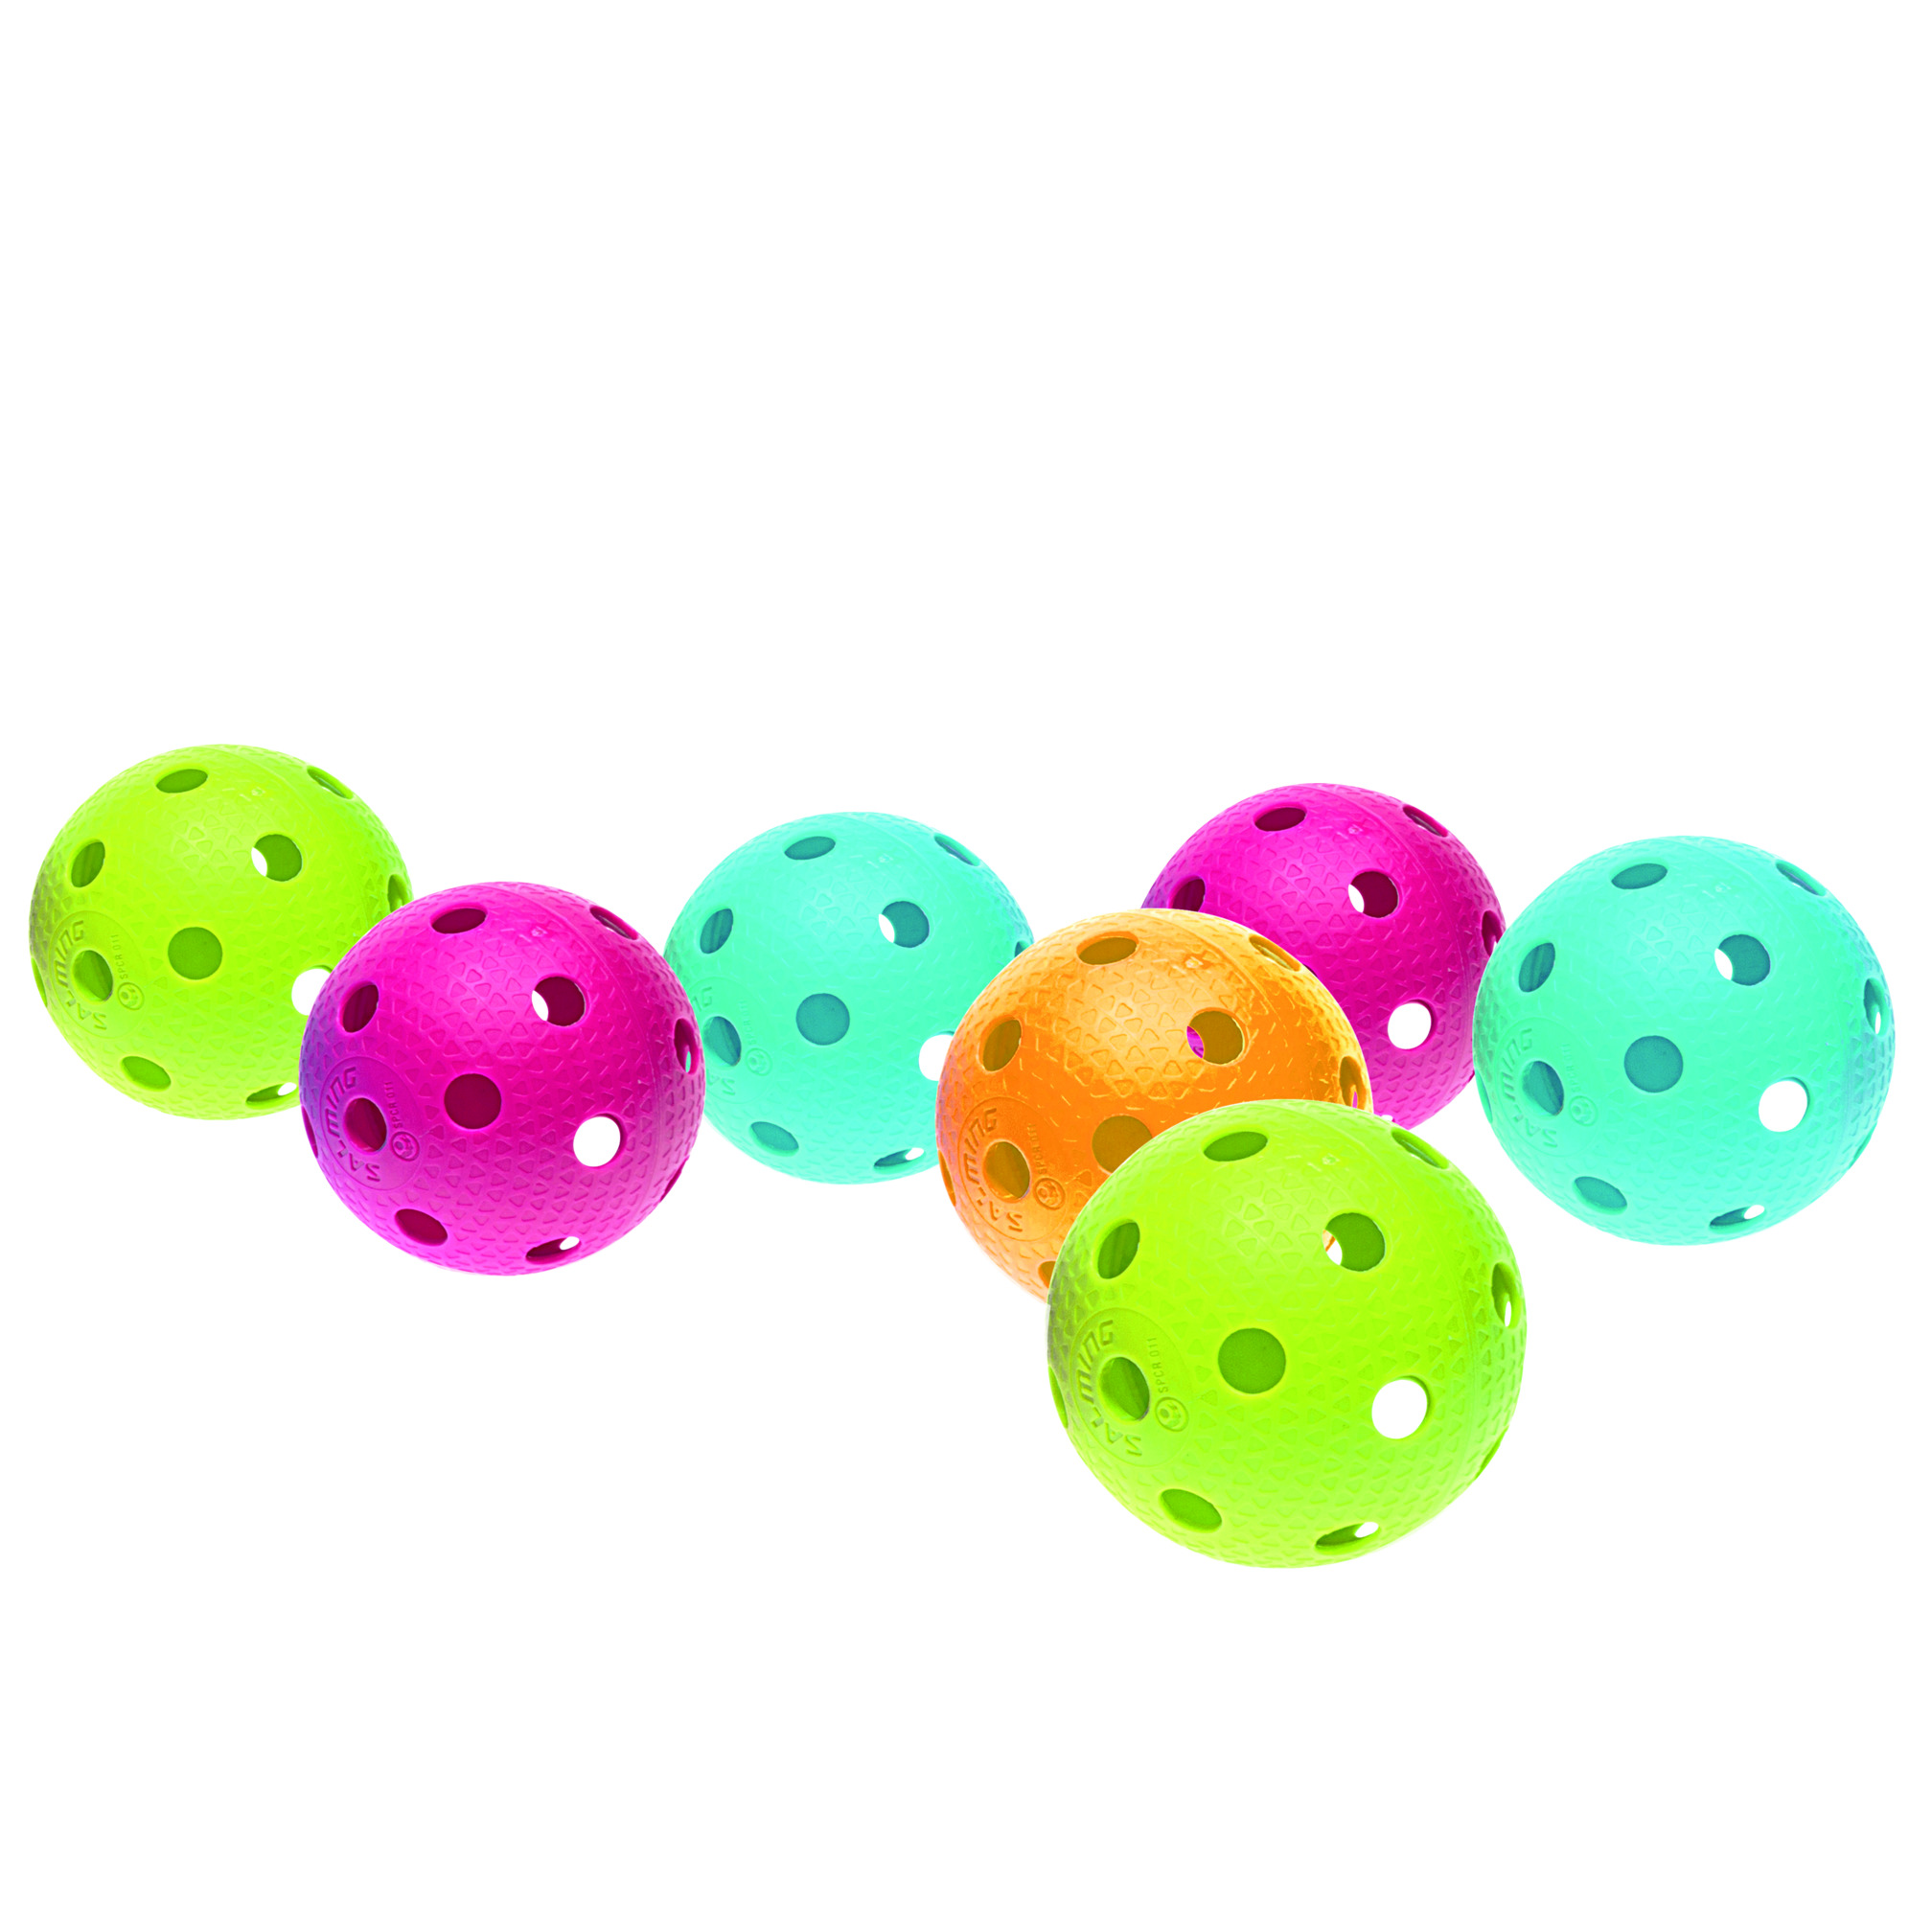 Perforated ball hard, colored